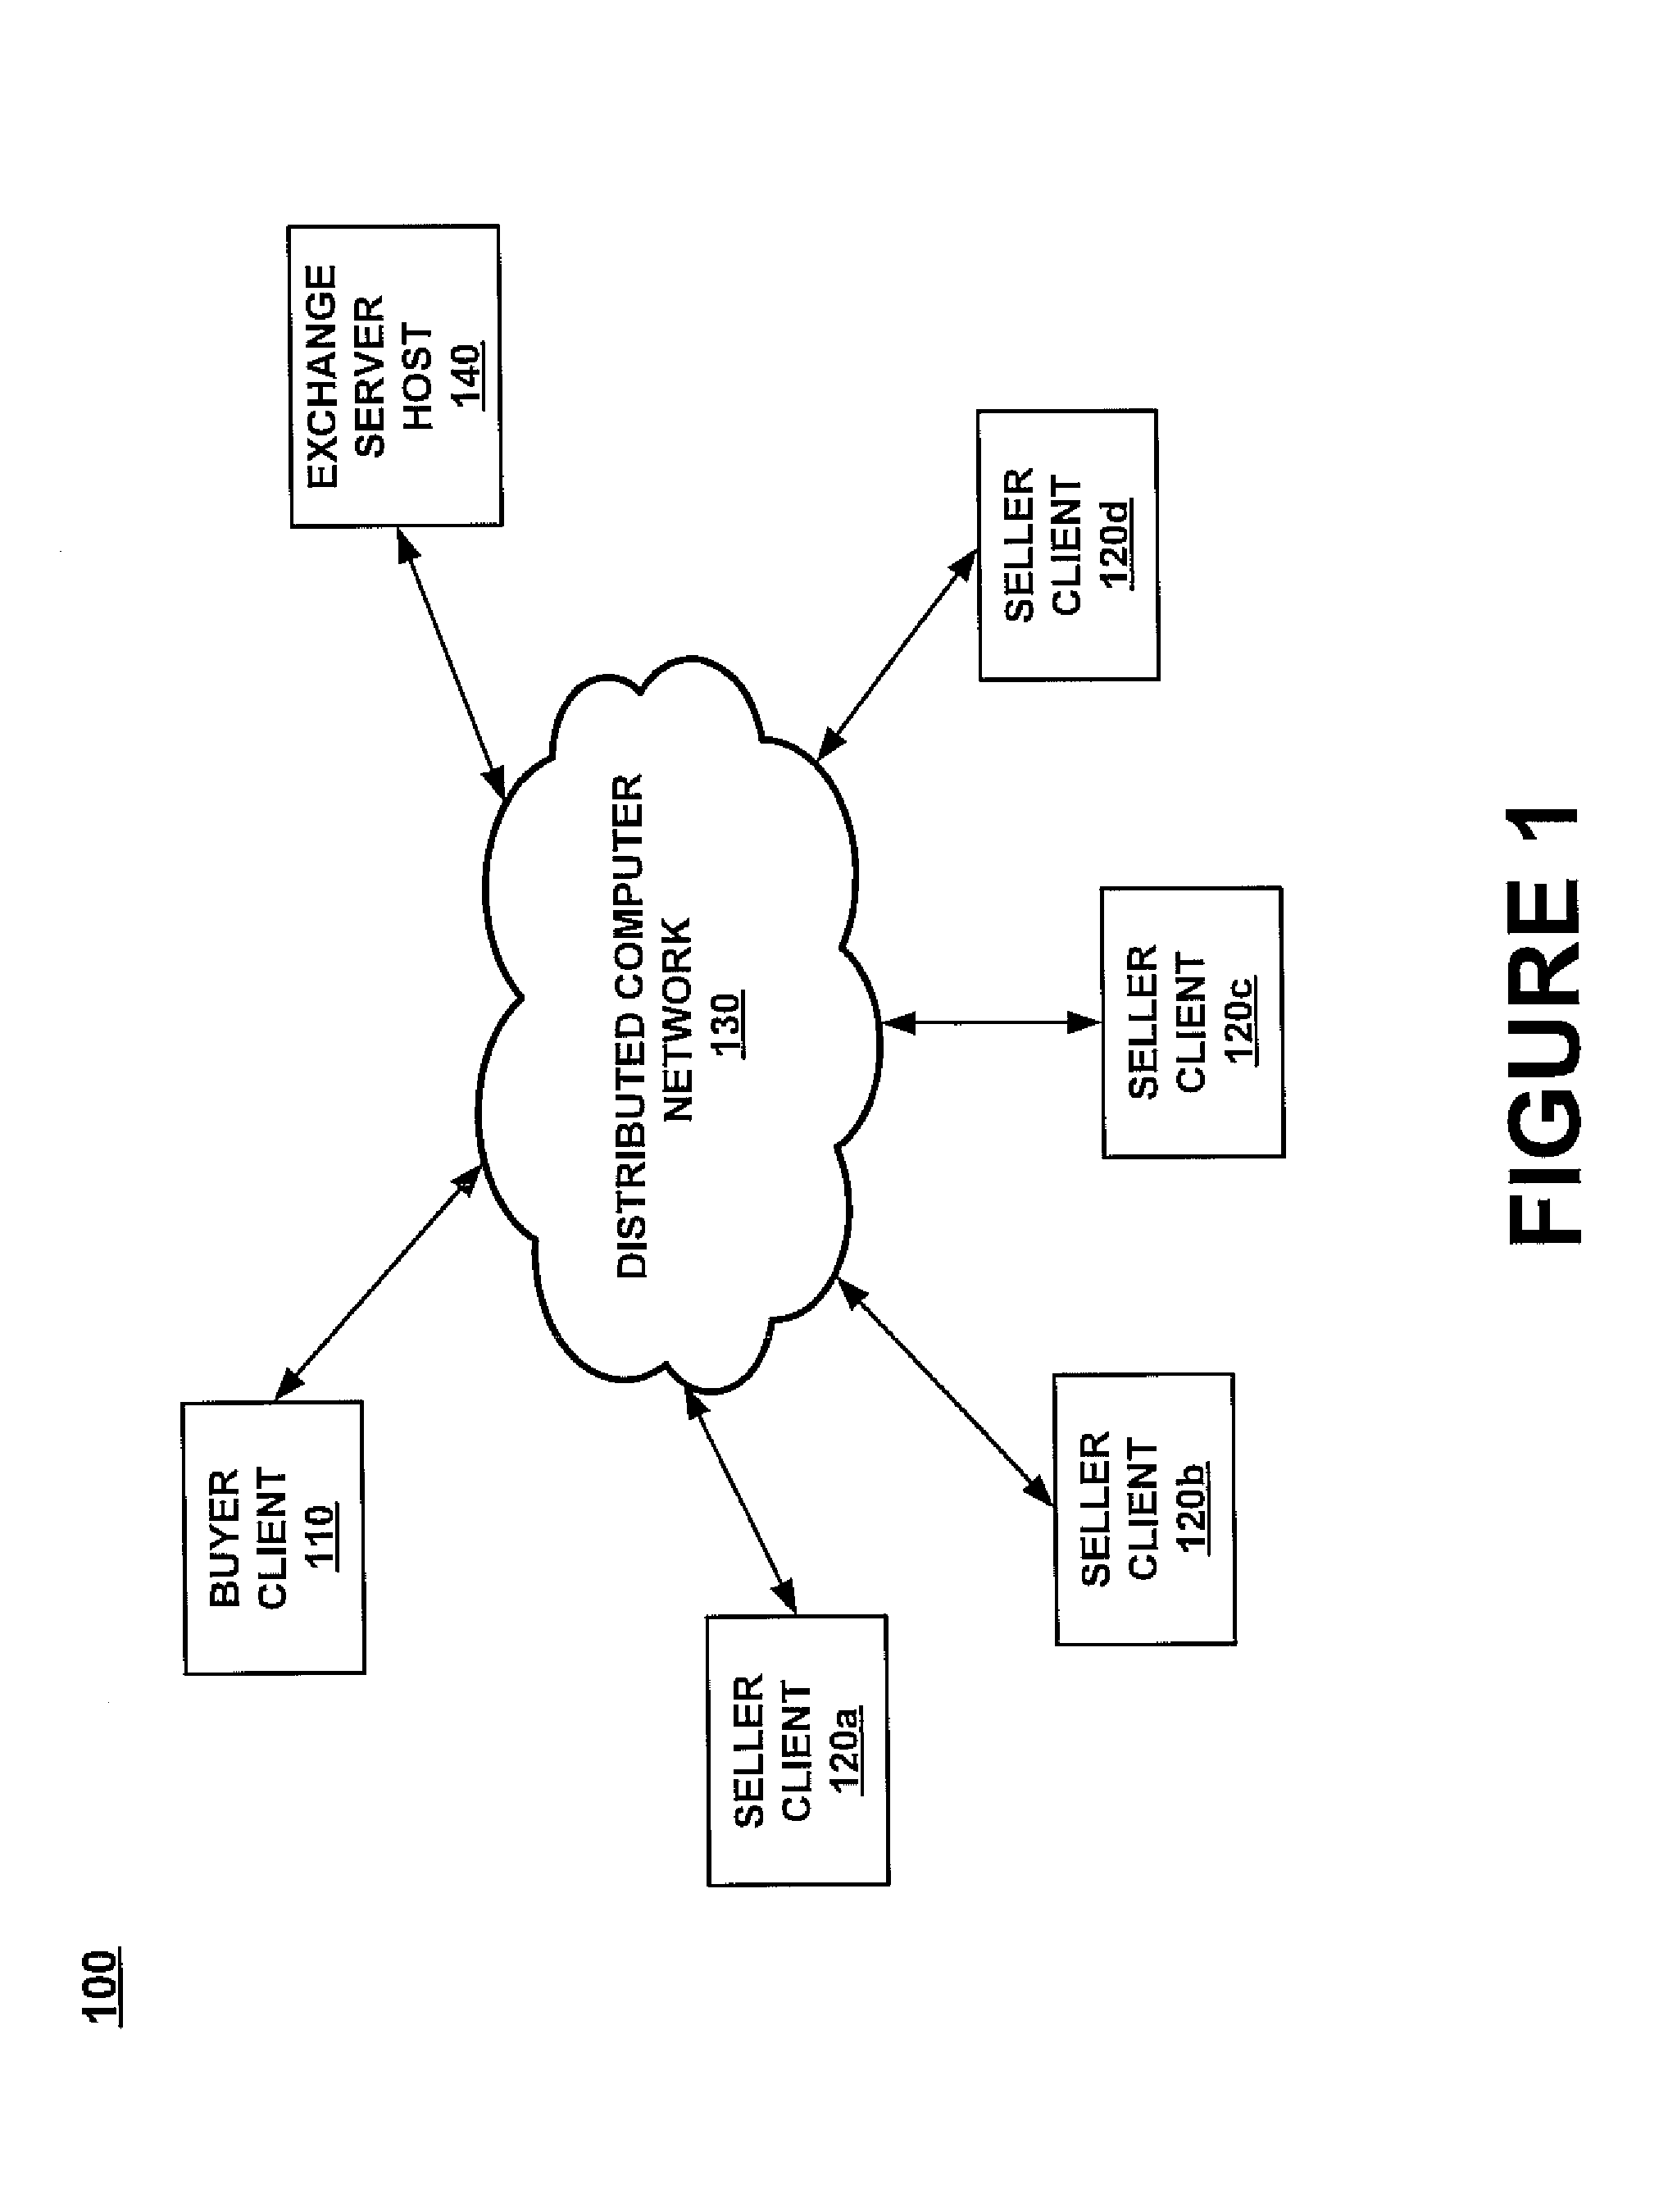 Method and system for implementing attribute-based bidding and bid comparison in an electronic exchange